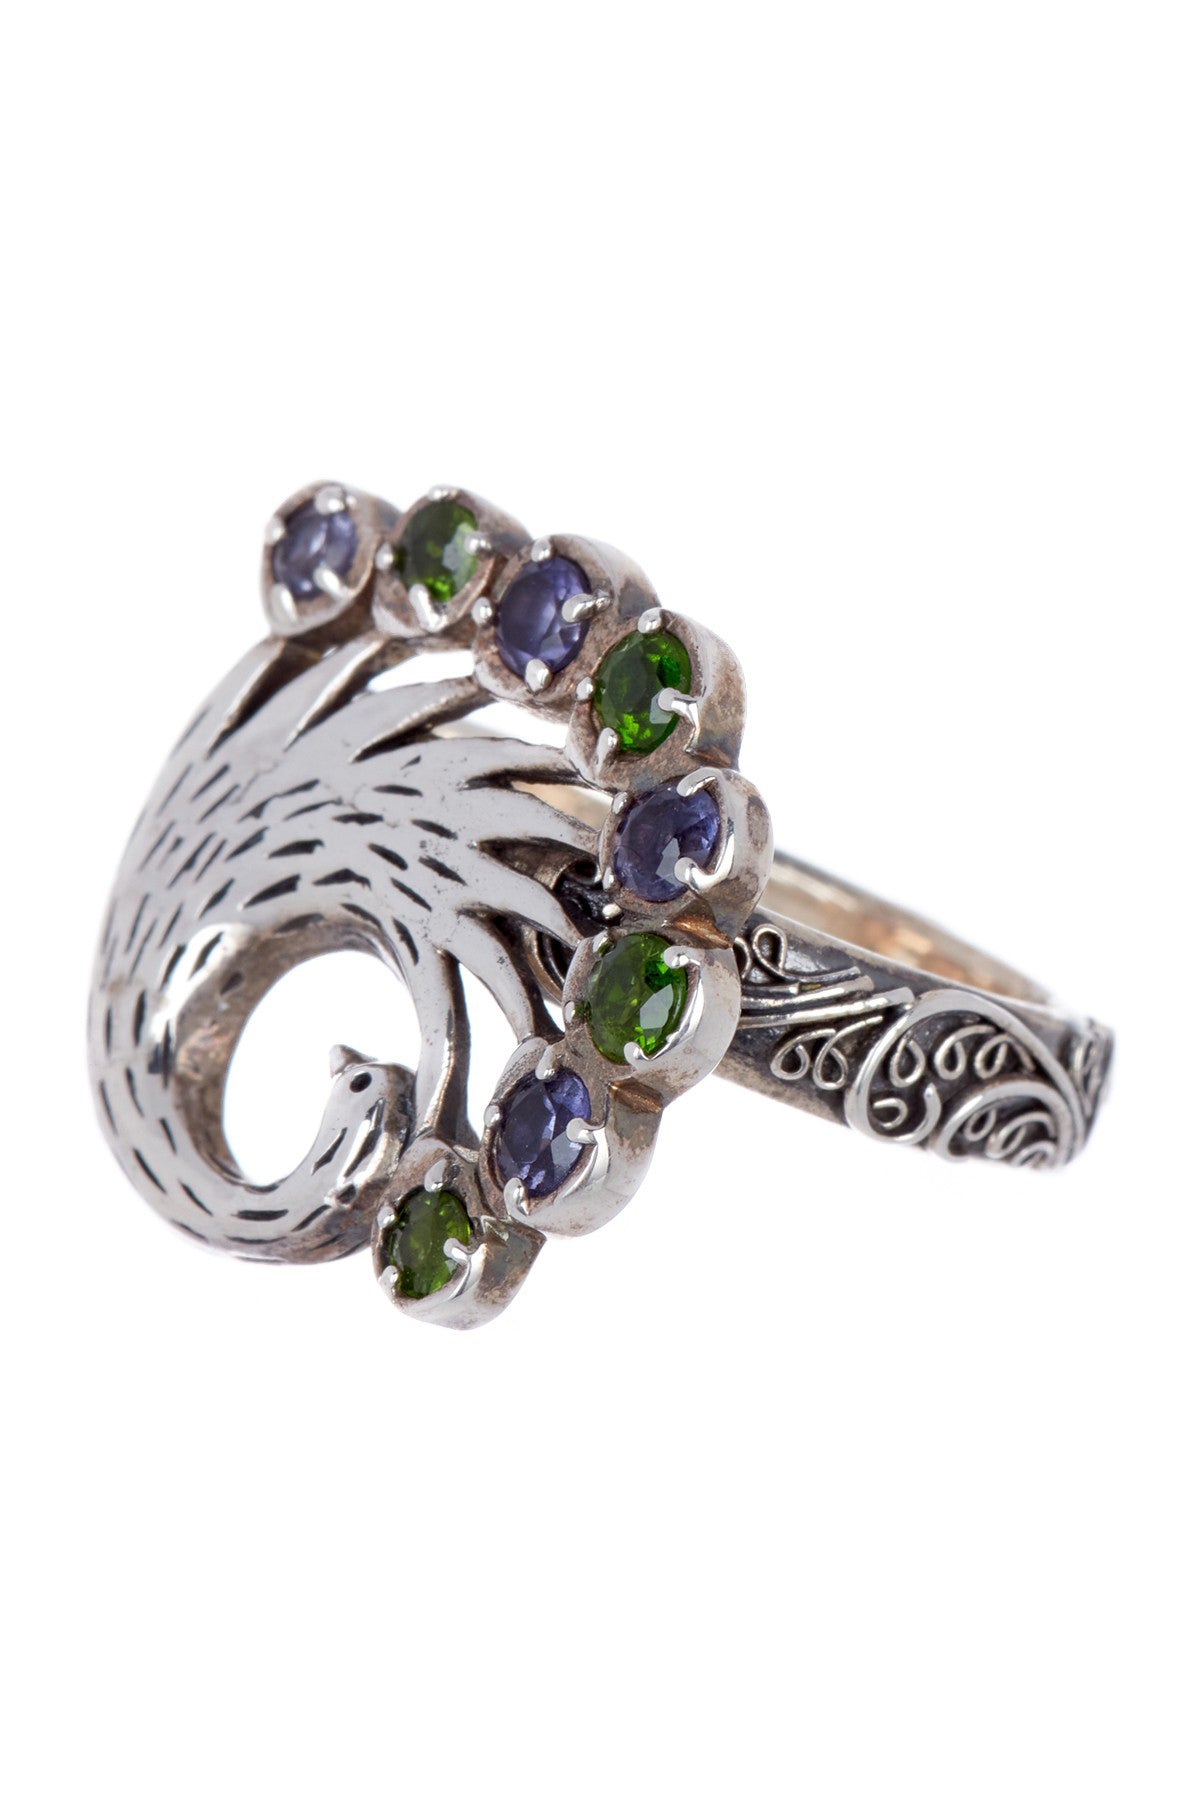 Peacock Ring in Sterling Silver Resizeable – Jambo